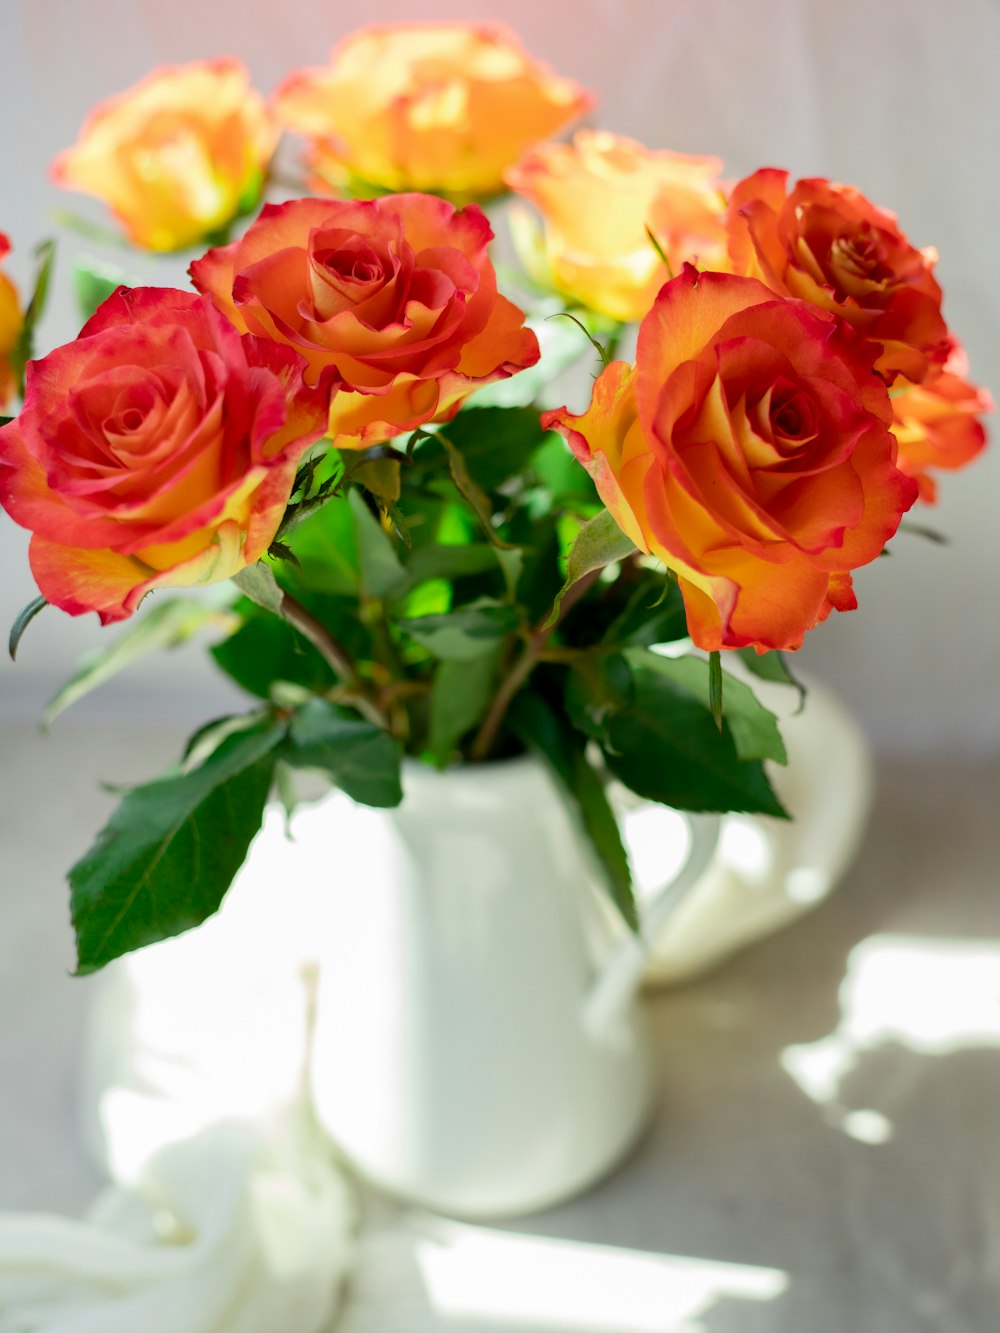 red and yellow roses in white ceramic vase